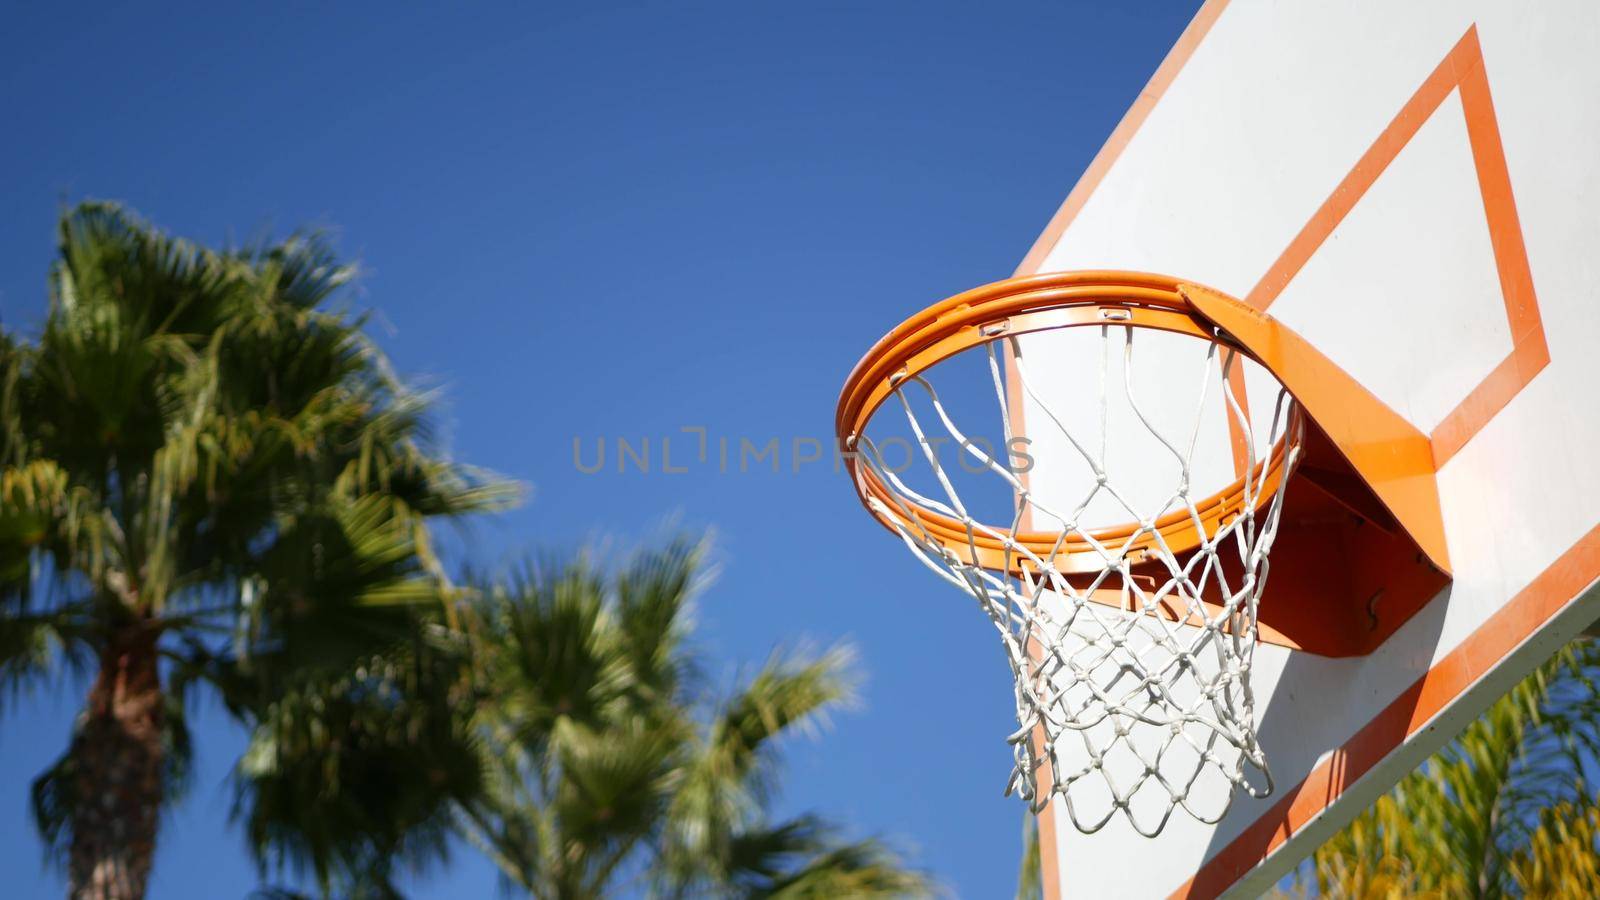 Basketball court outdoors, orange hoop, net and backboard for basket ball game outside. Recreational sport equipment on streetball field or playground. Blue sky and beach palm trees, California USA.